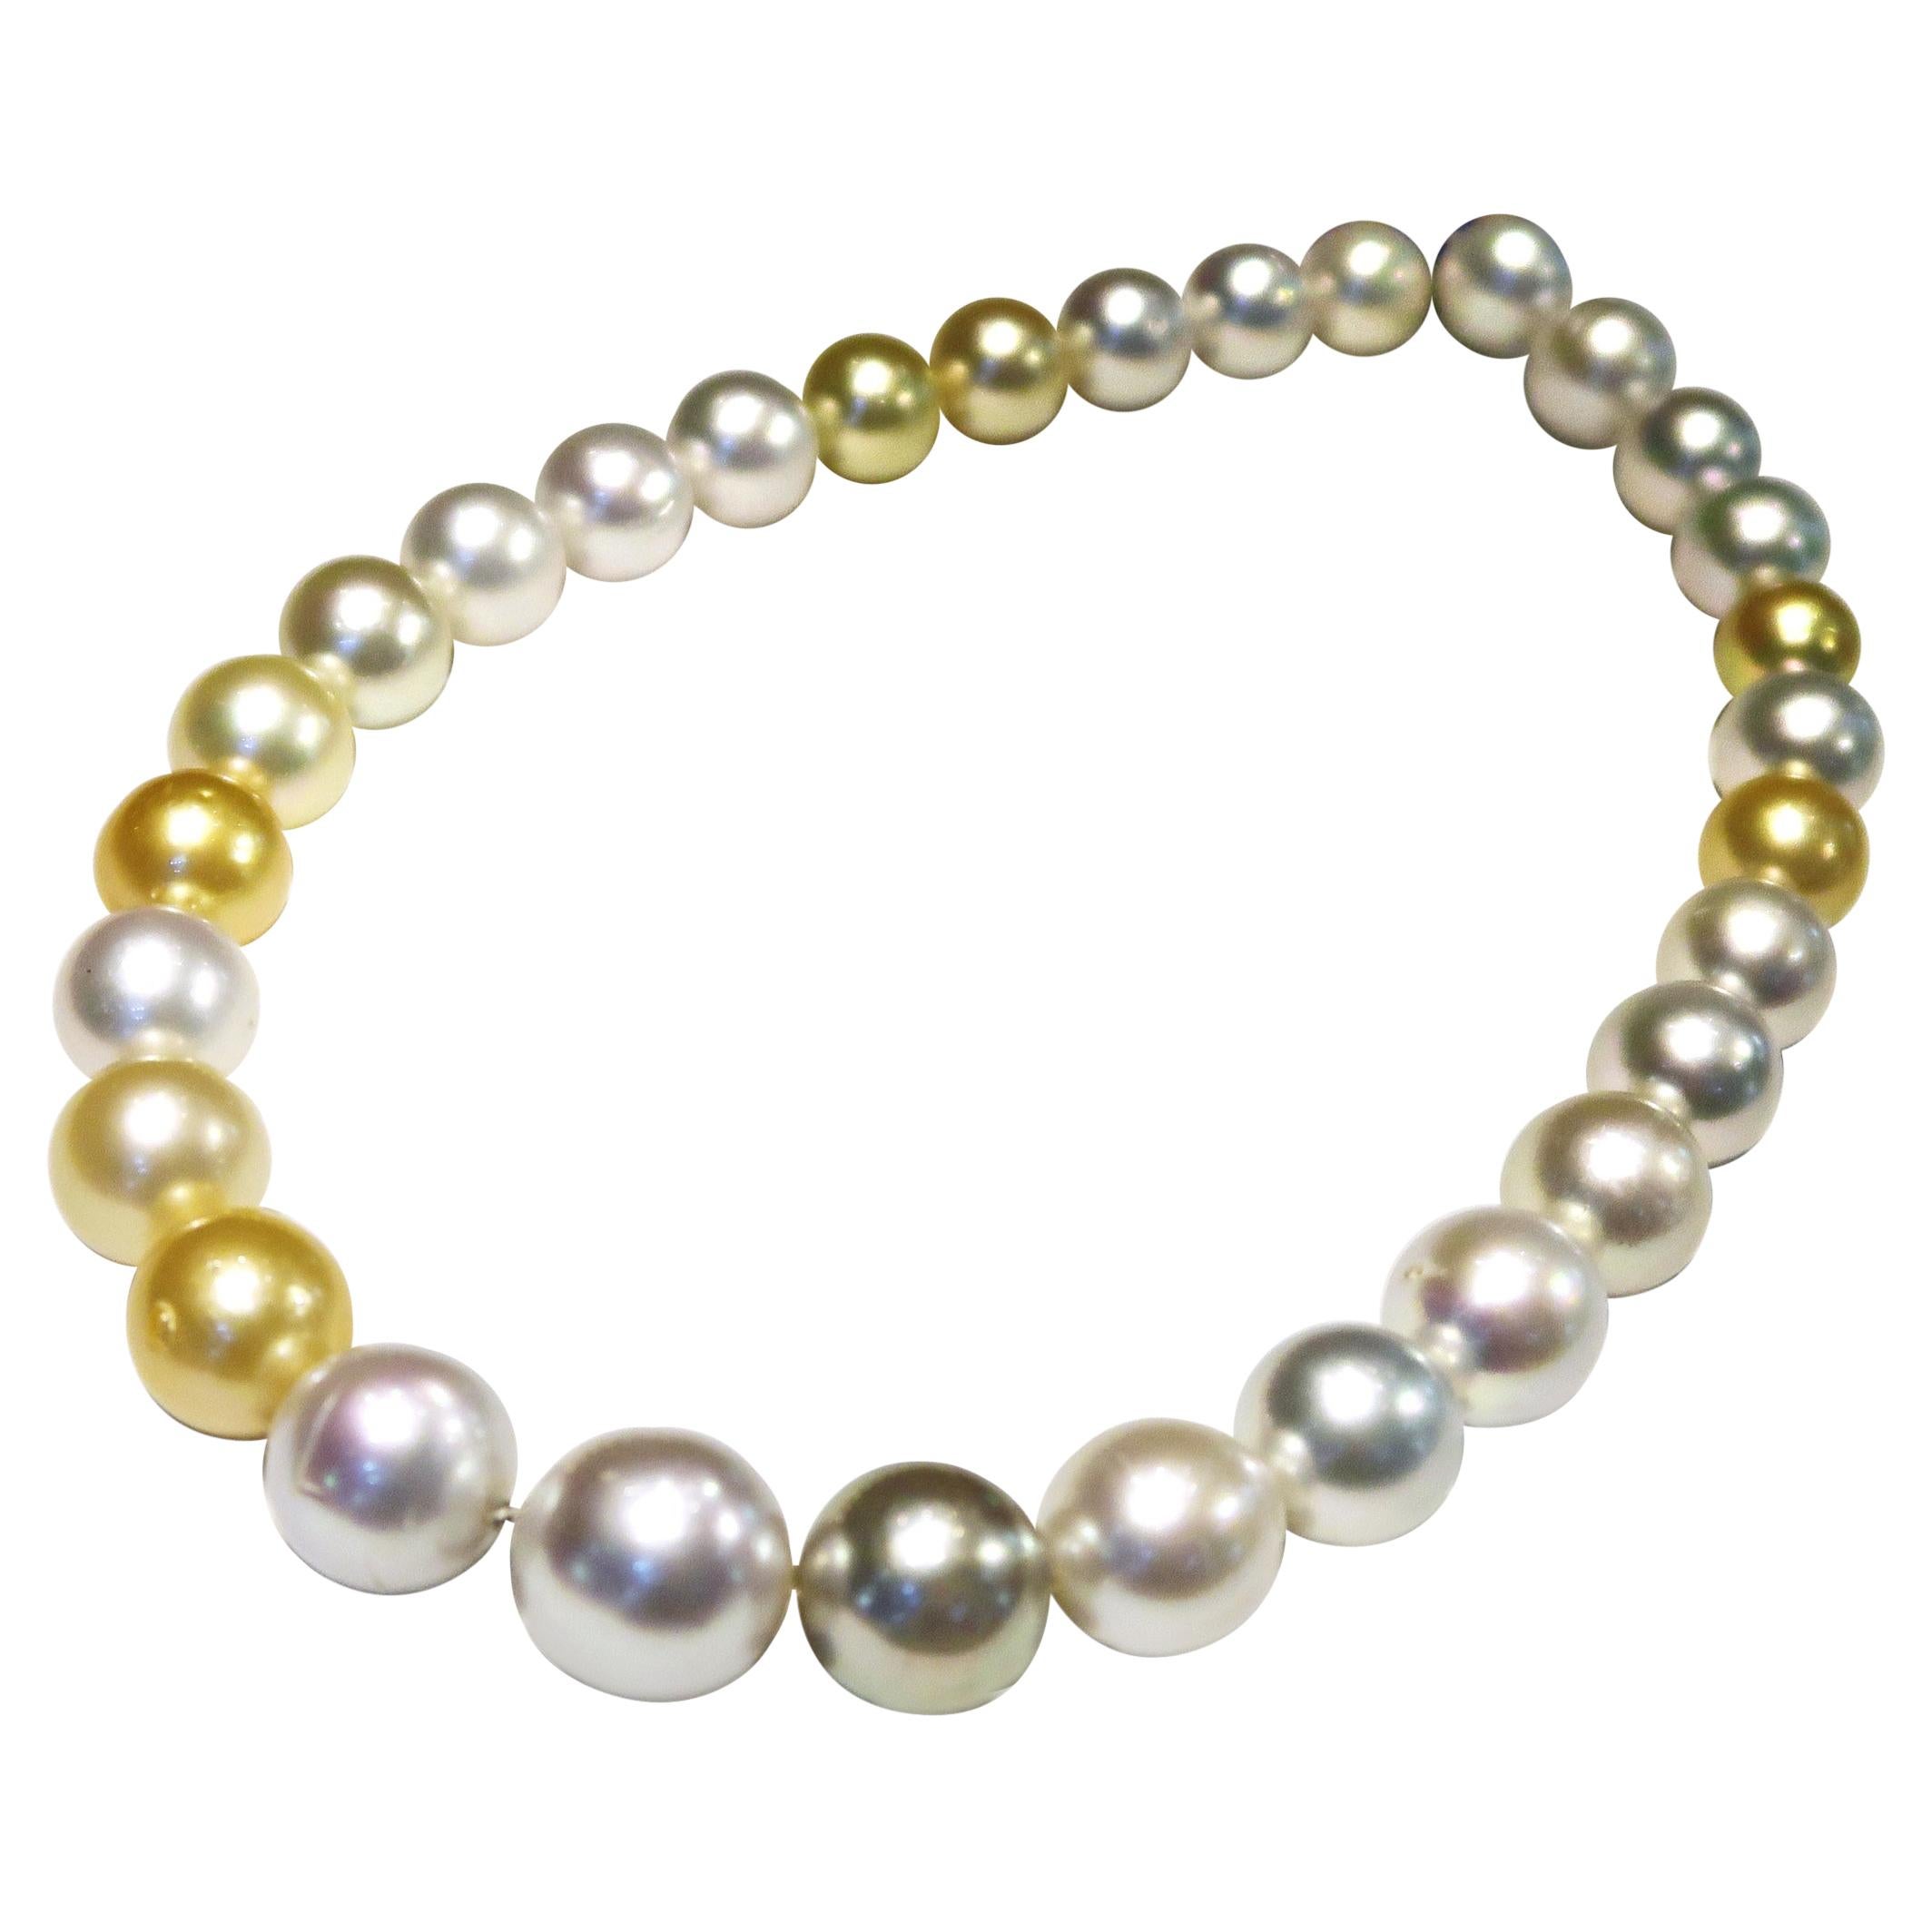 Shades of Silvery White and Deep Gold South Sea Pearl Necklace